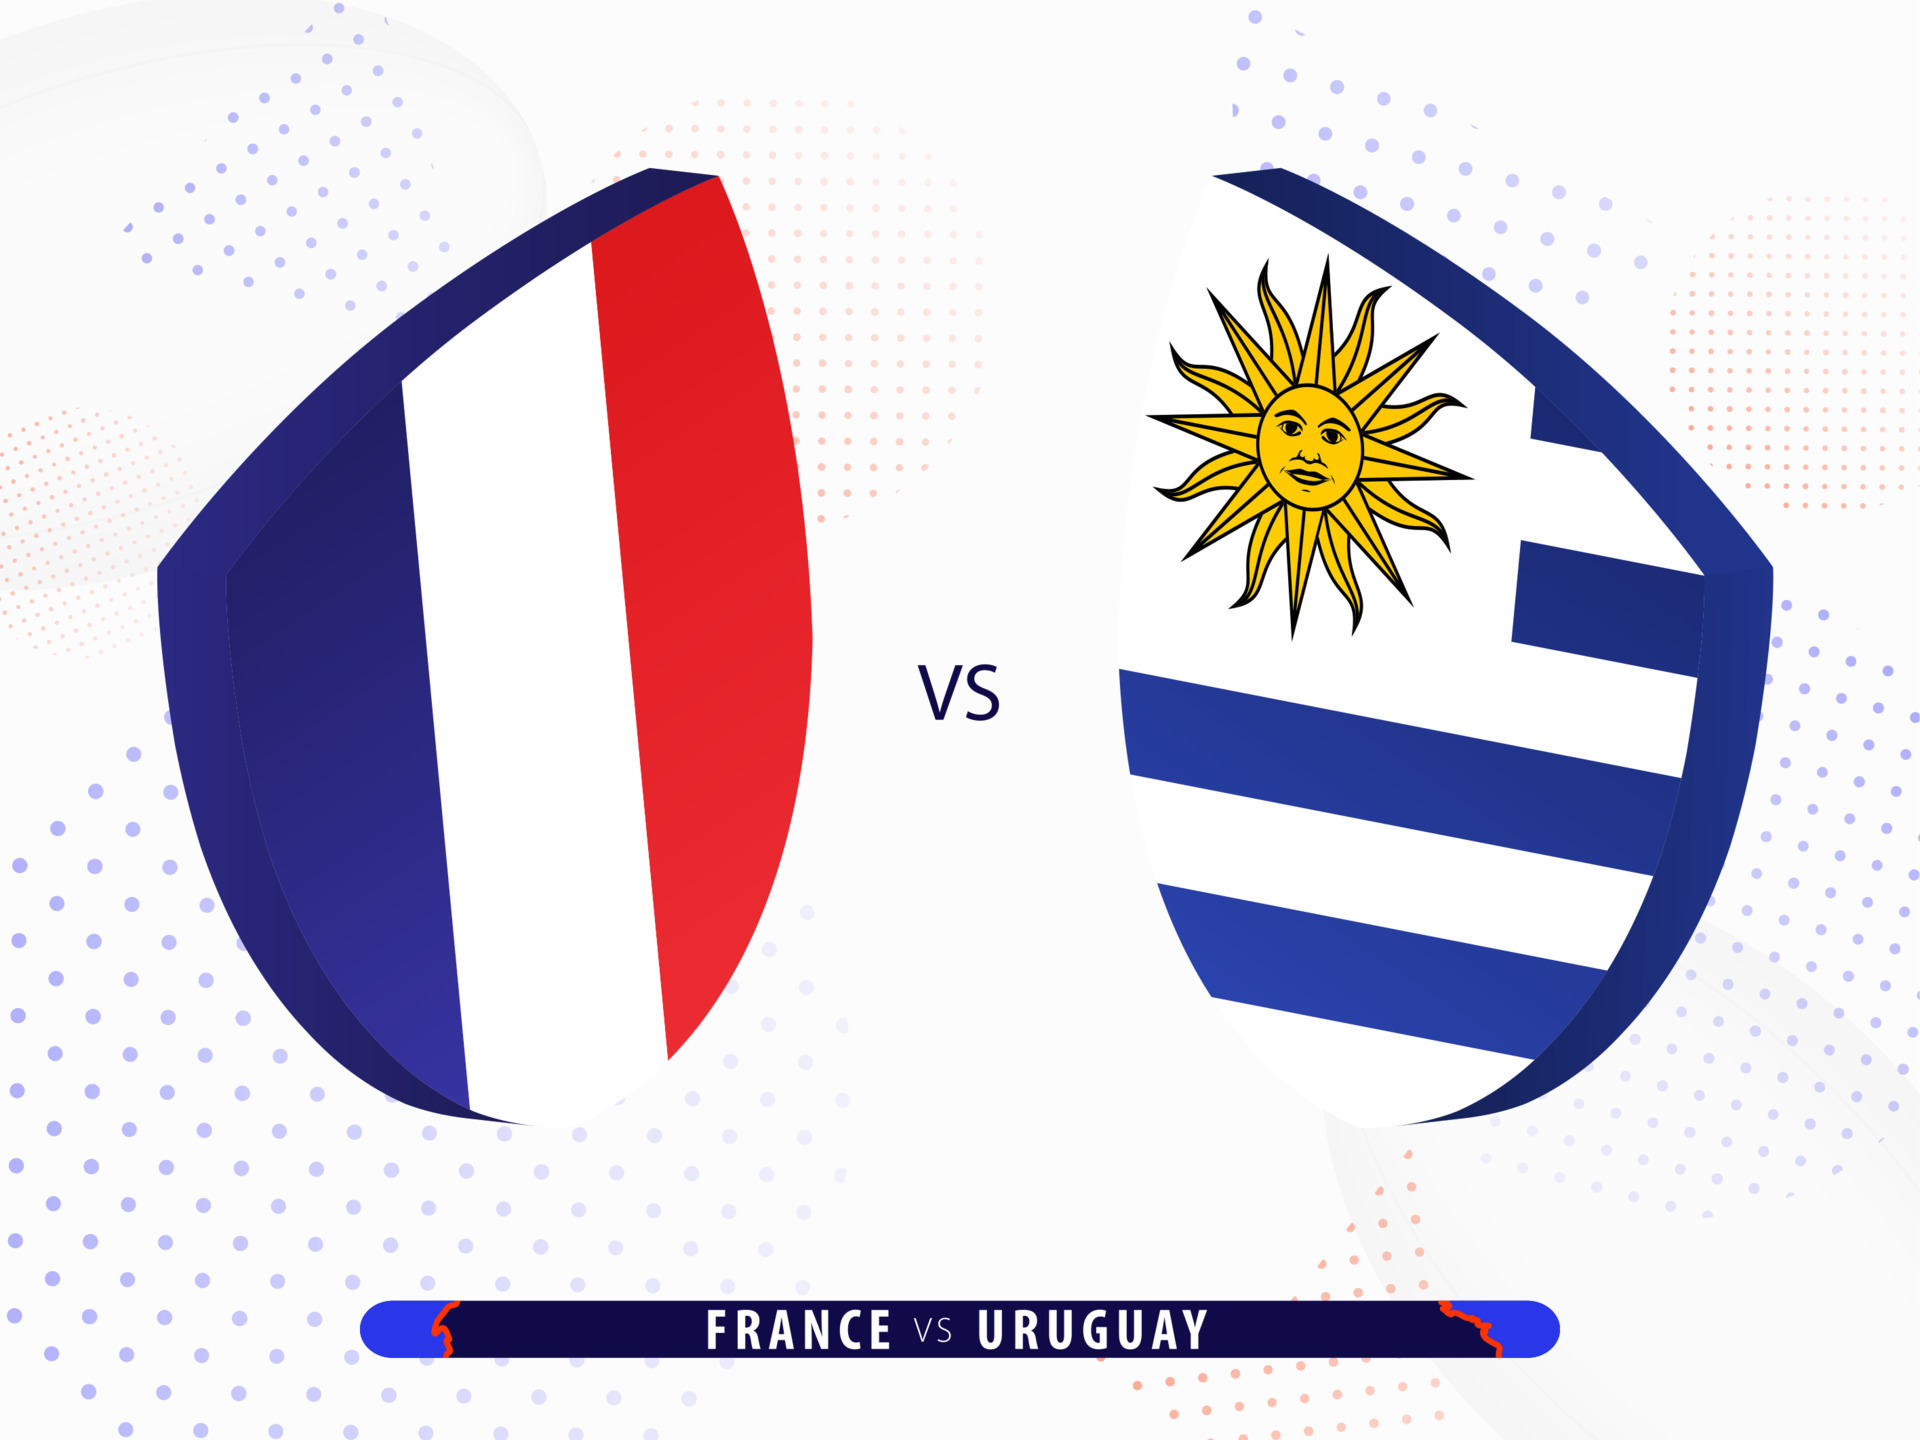 France vs Uruguay rugby match, international rugby competition 2023